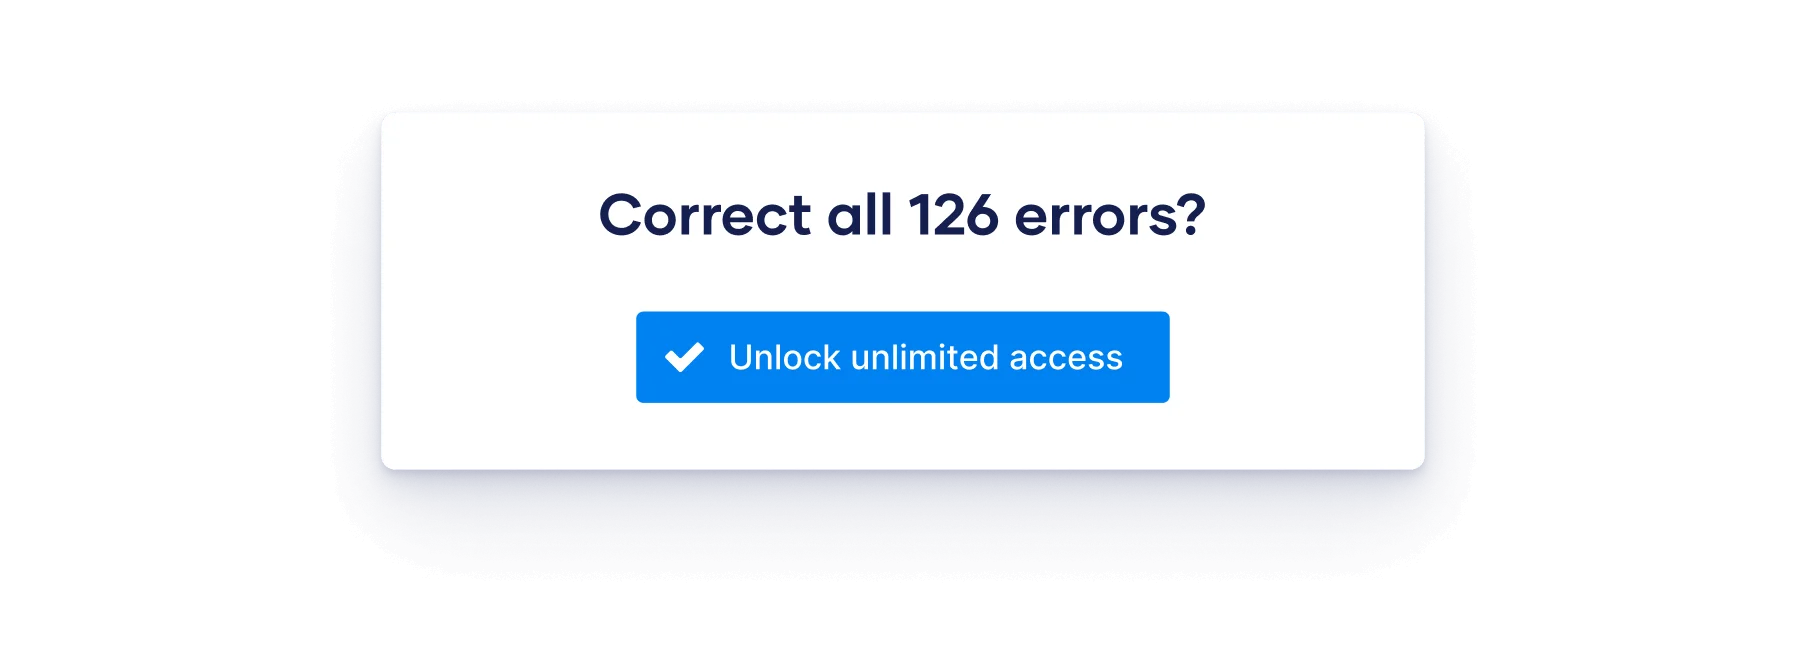 Review all mistakes in detail by unlocking unlimited access